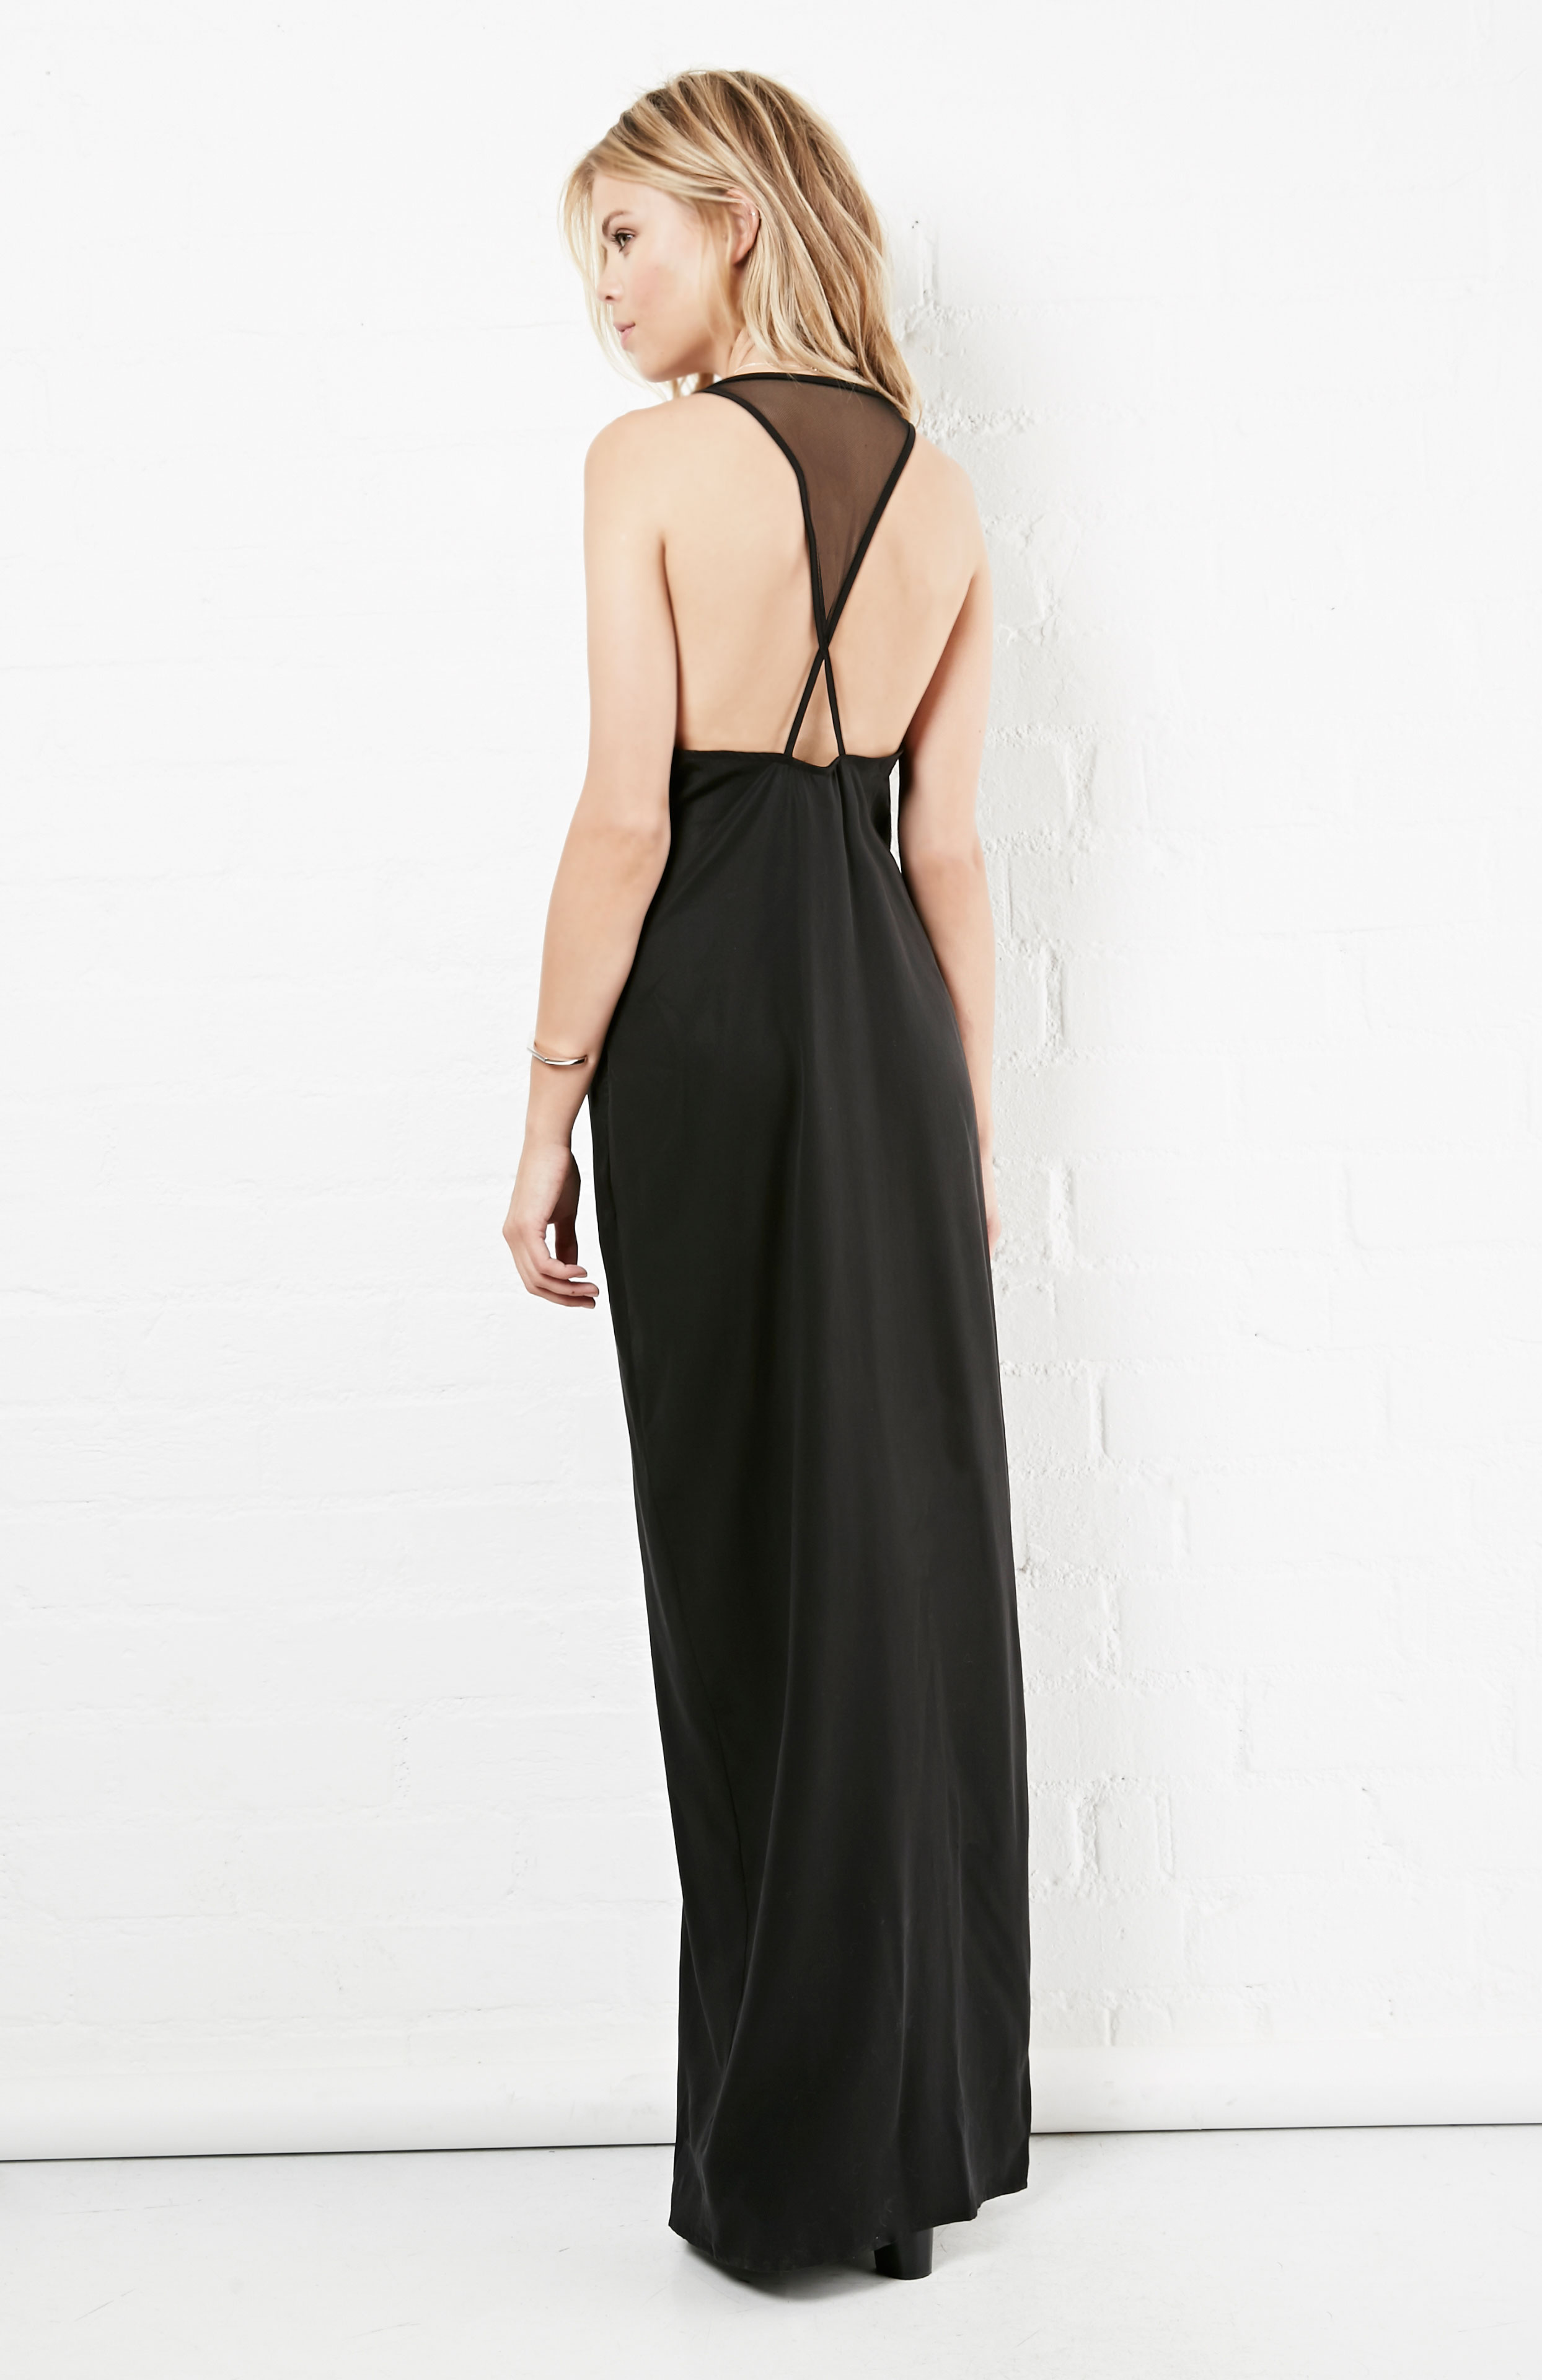 State Of Being Anthracite Maxi Dress in Black | DAILYLOOK